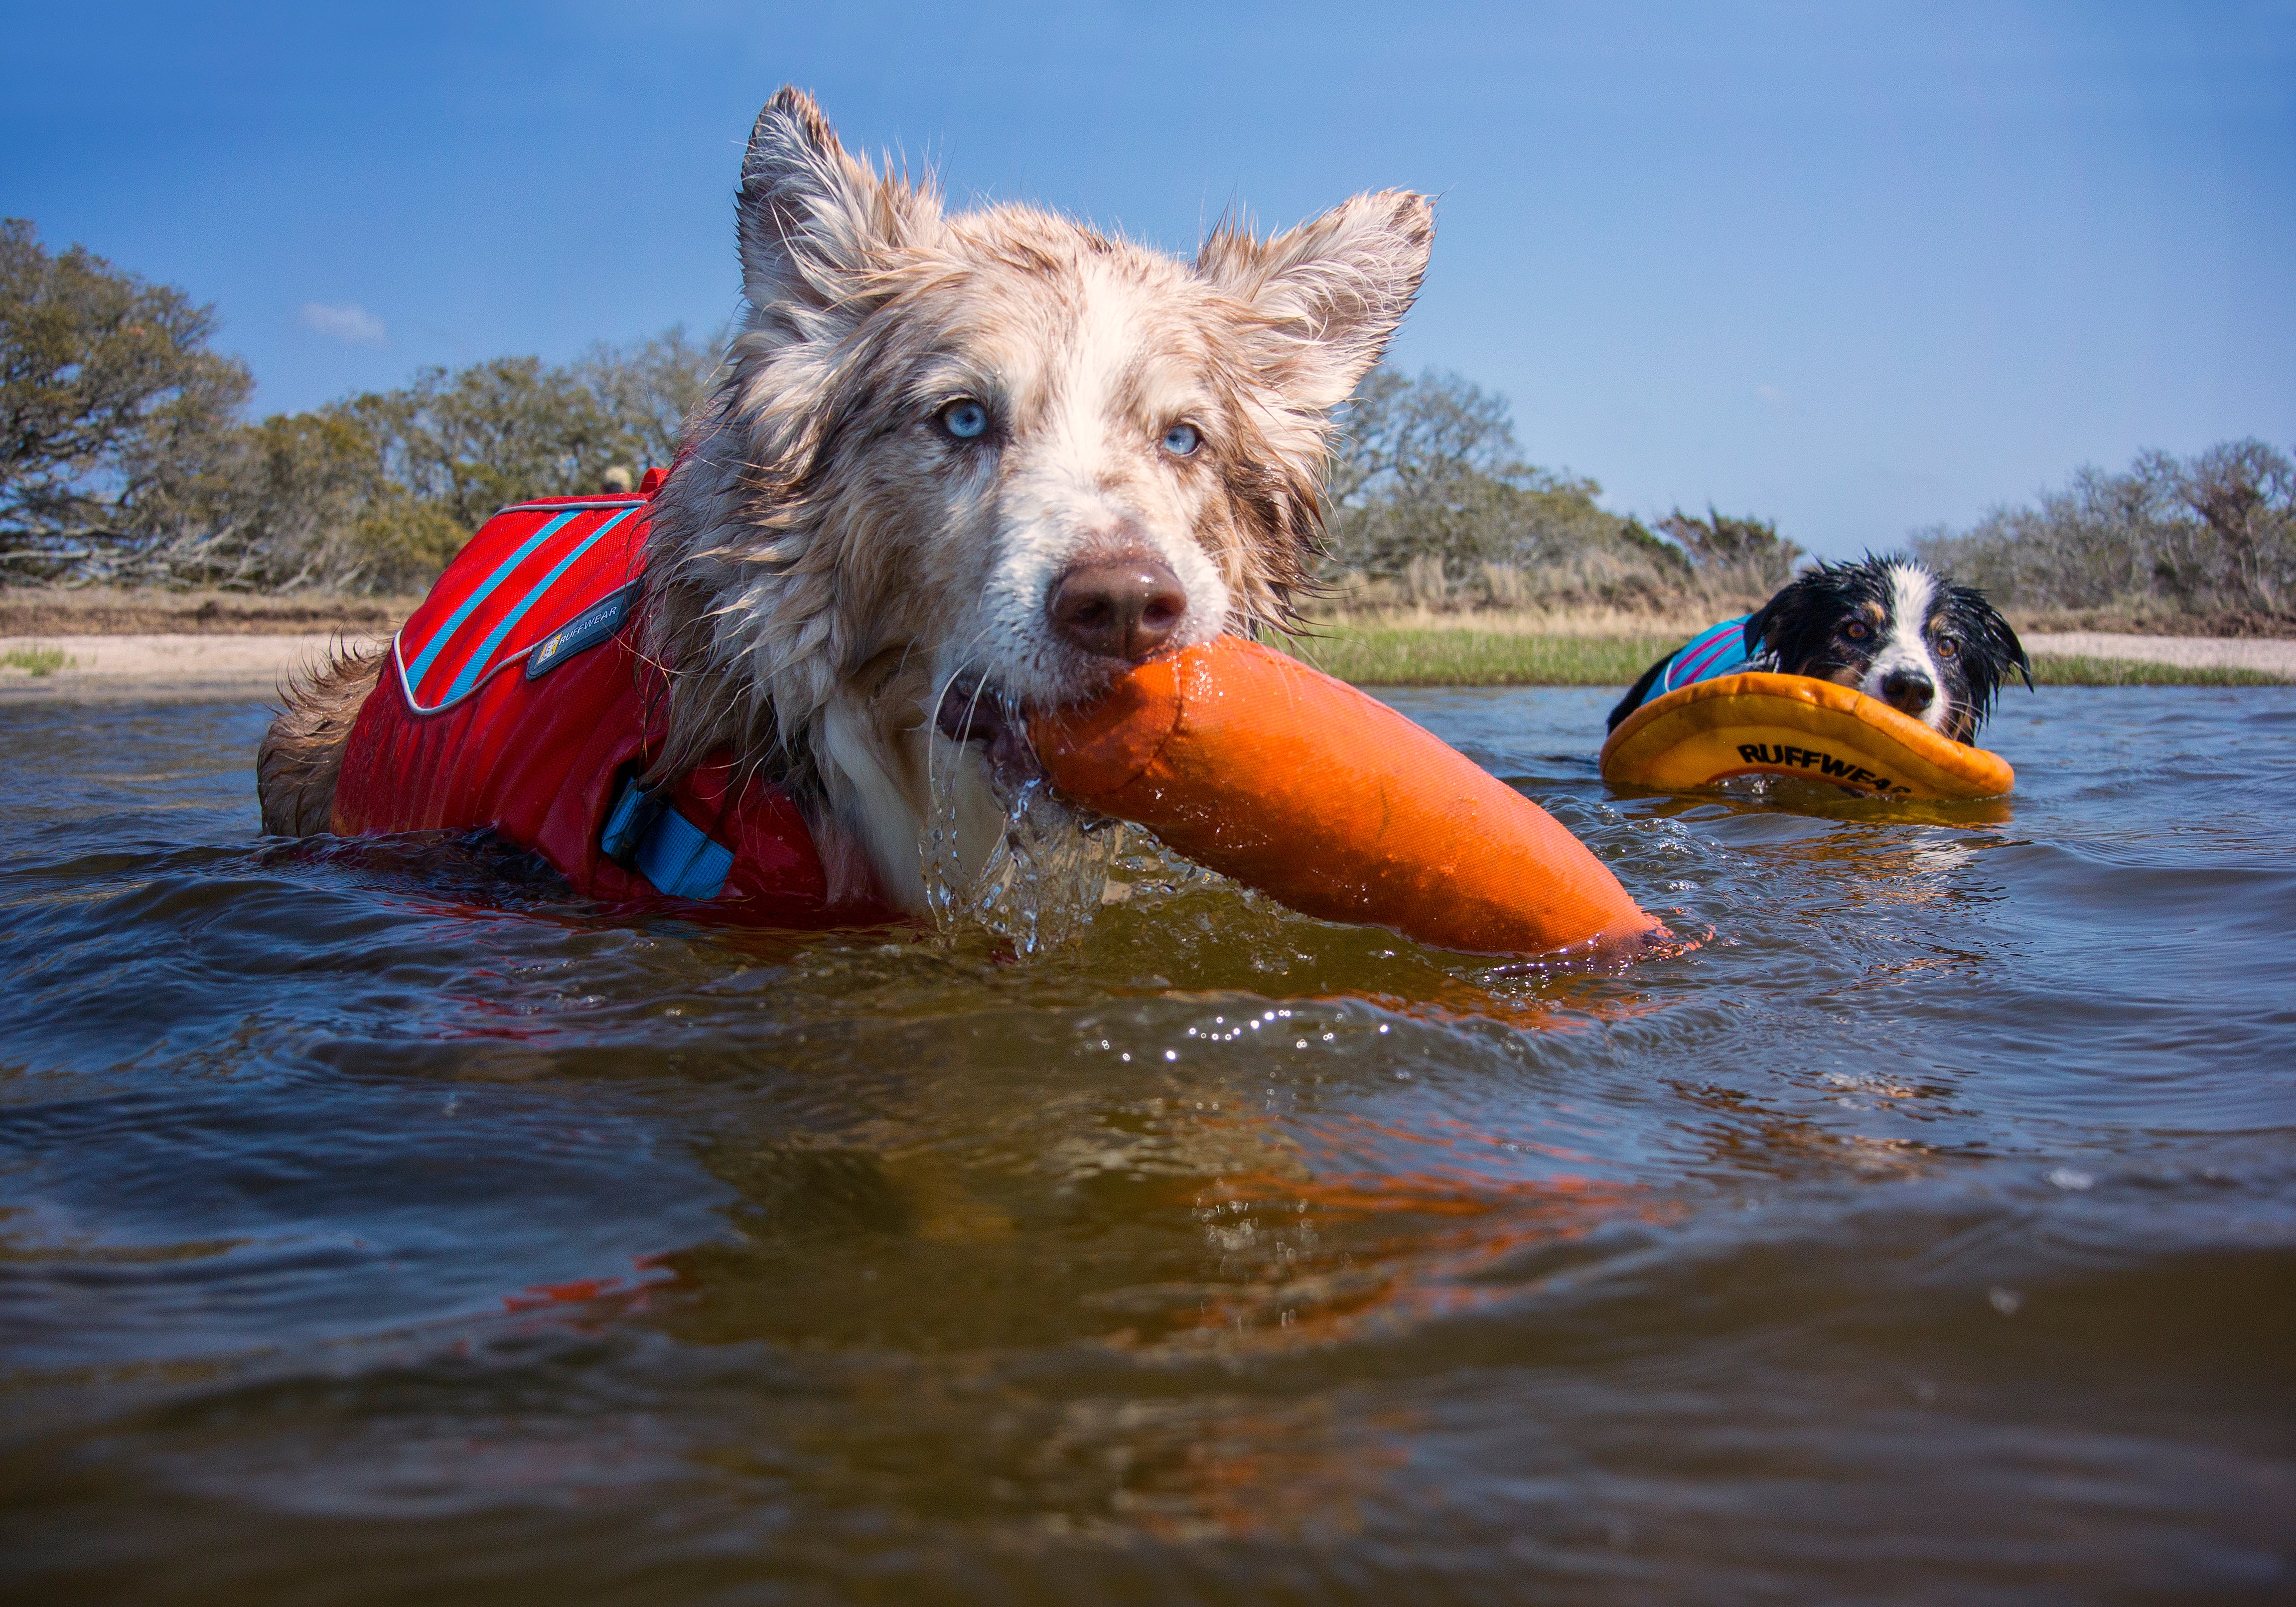 Willow and Bodie play with Lunker and Hydro Plane floating dog toys in the water.